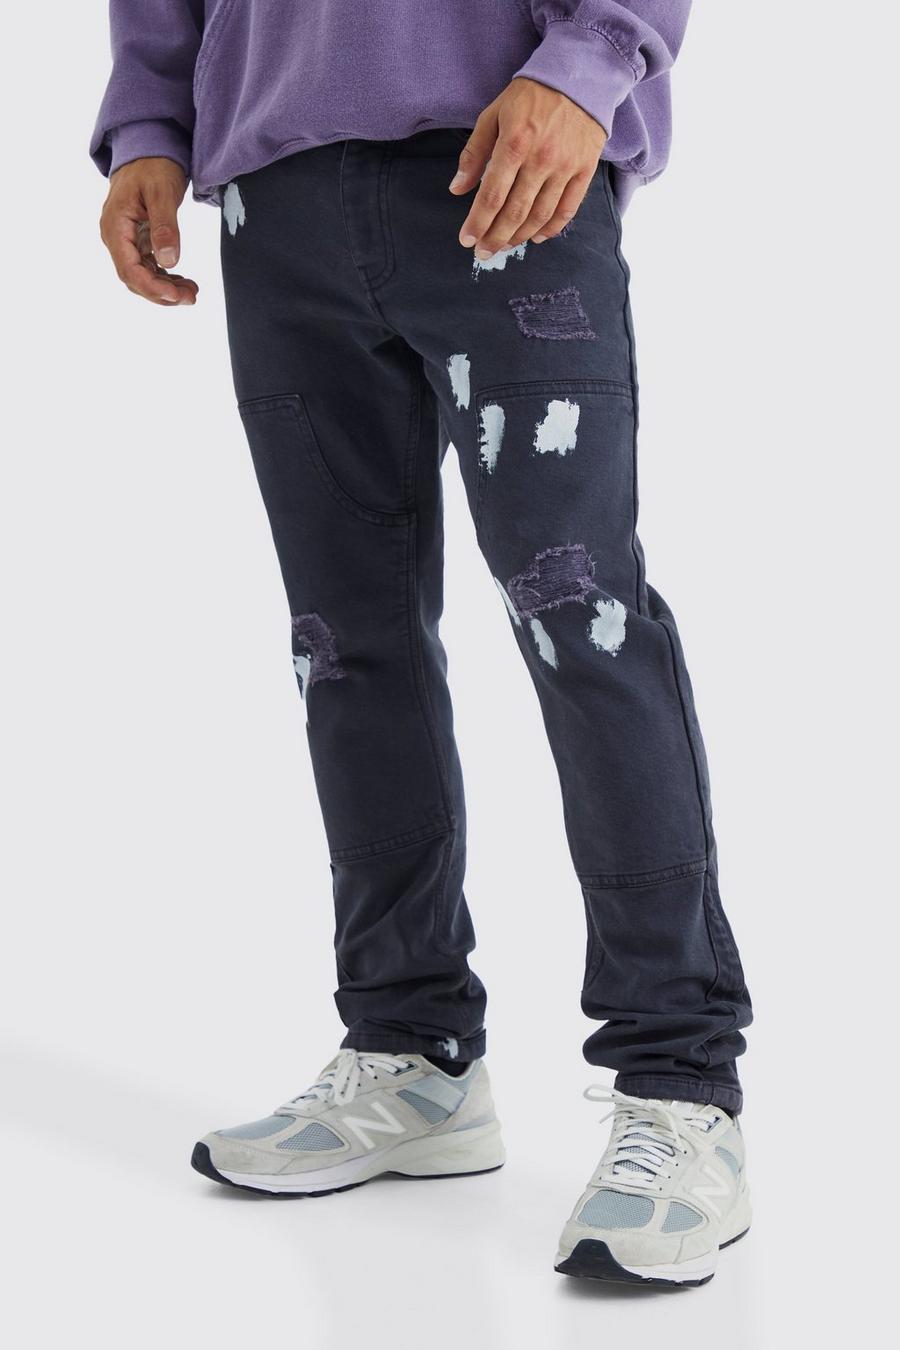 Mid grey Look stylish and help save the planet whilst doing so in these pink cargo pants from image number 1